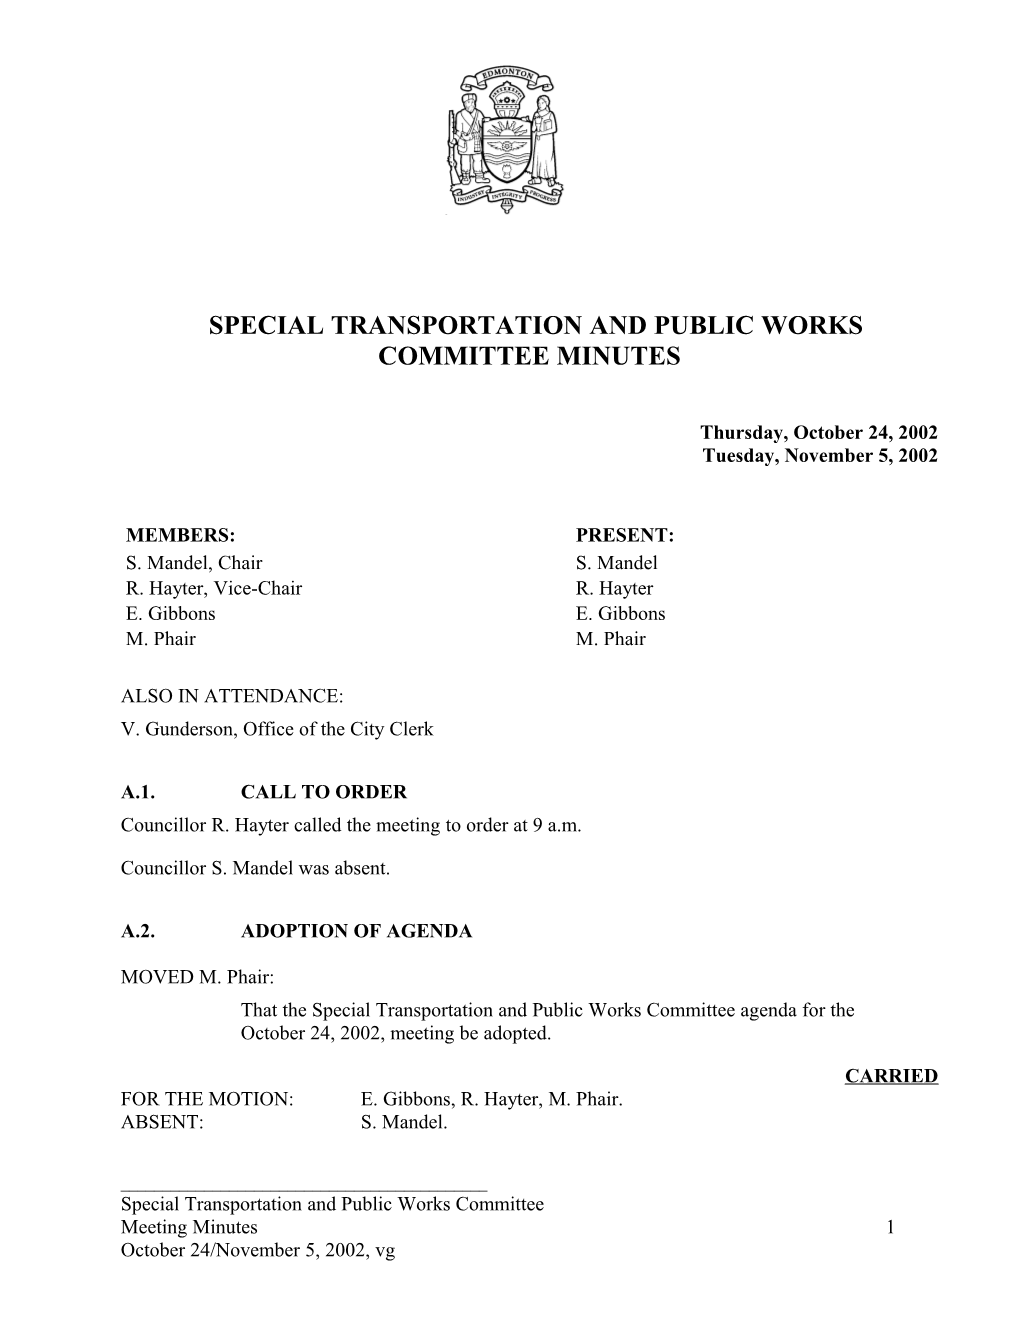 Minutes for Transportation and Public Works Committee October 24, 2002 Meeting